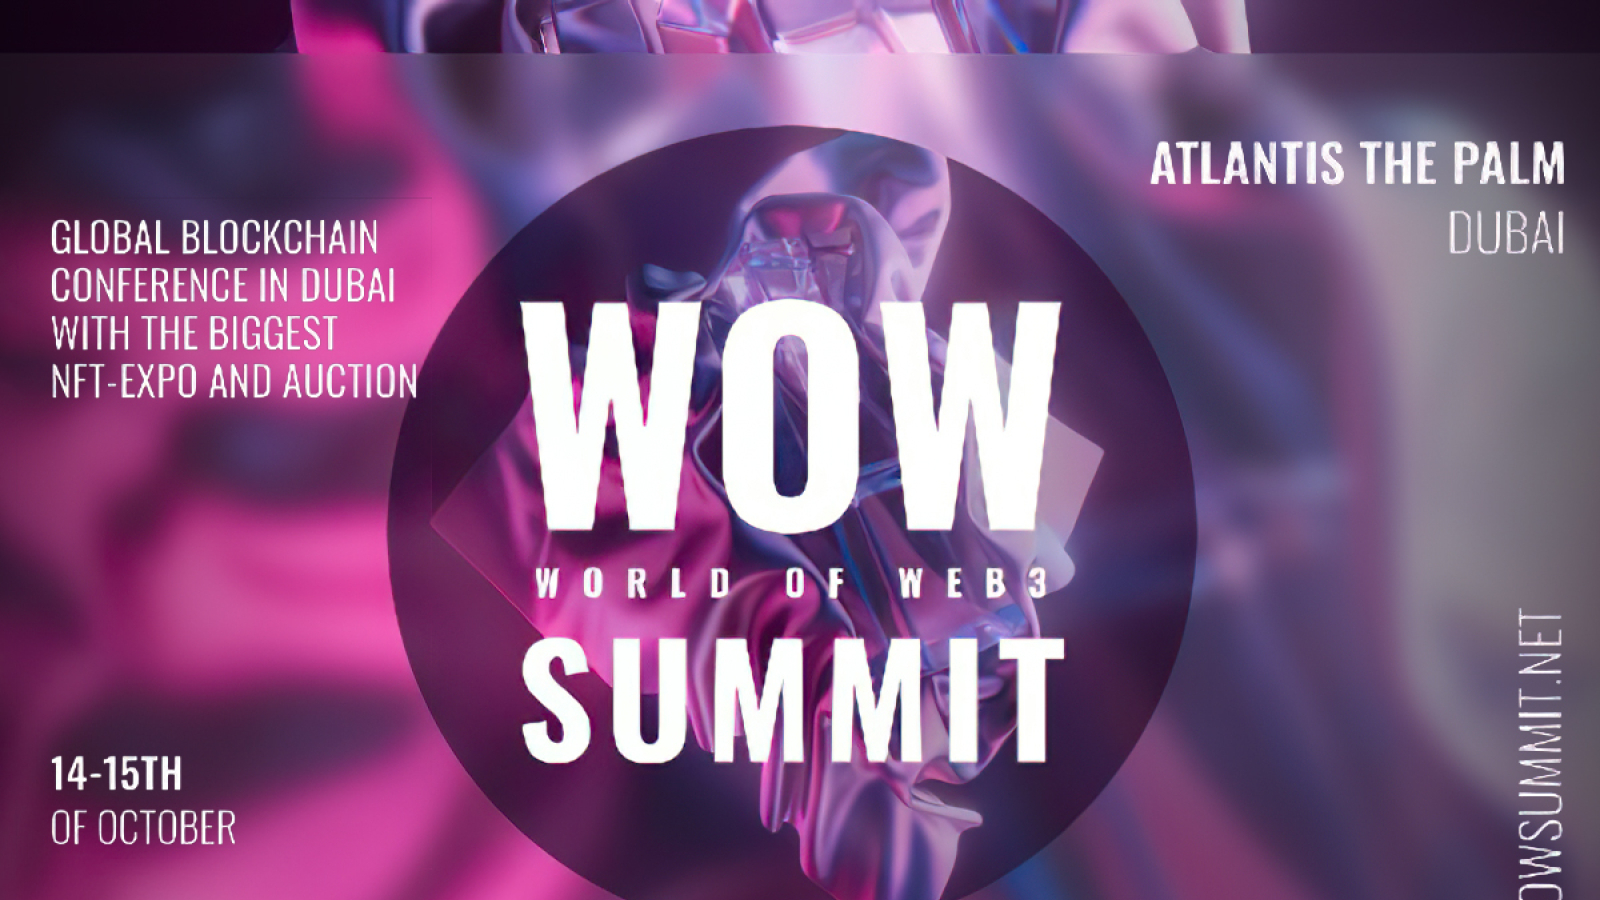 WOW Summit, the Biggest Blockchain Summit, and NFT Exhibition Will Take Place in Dubai